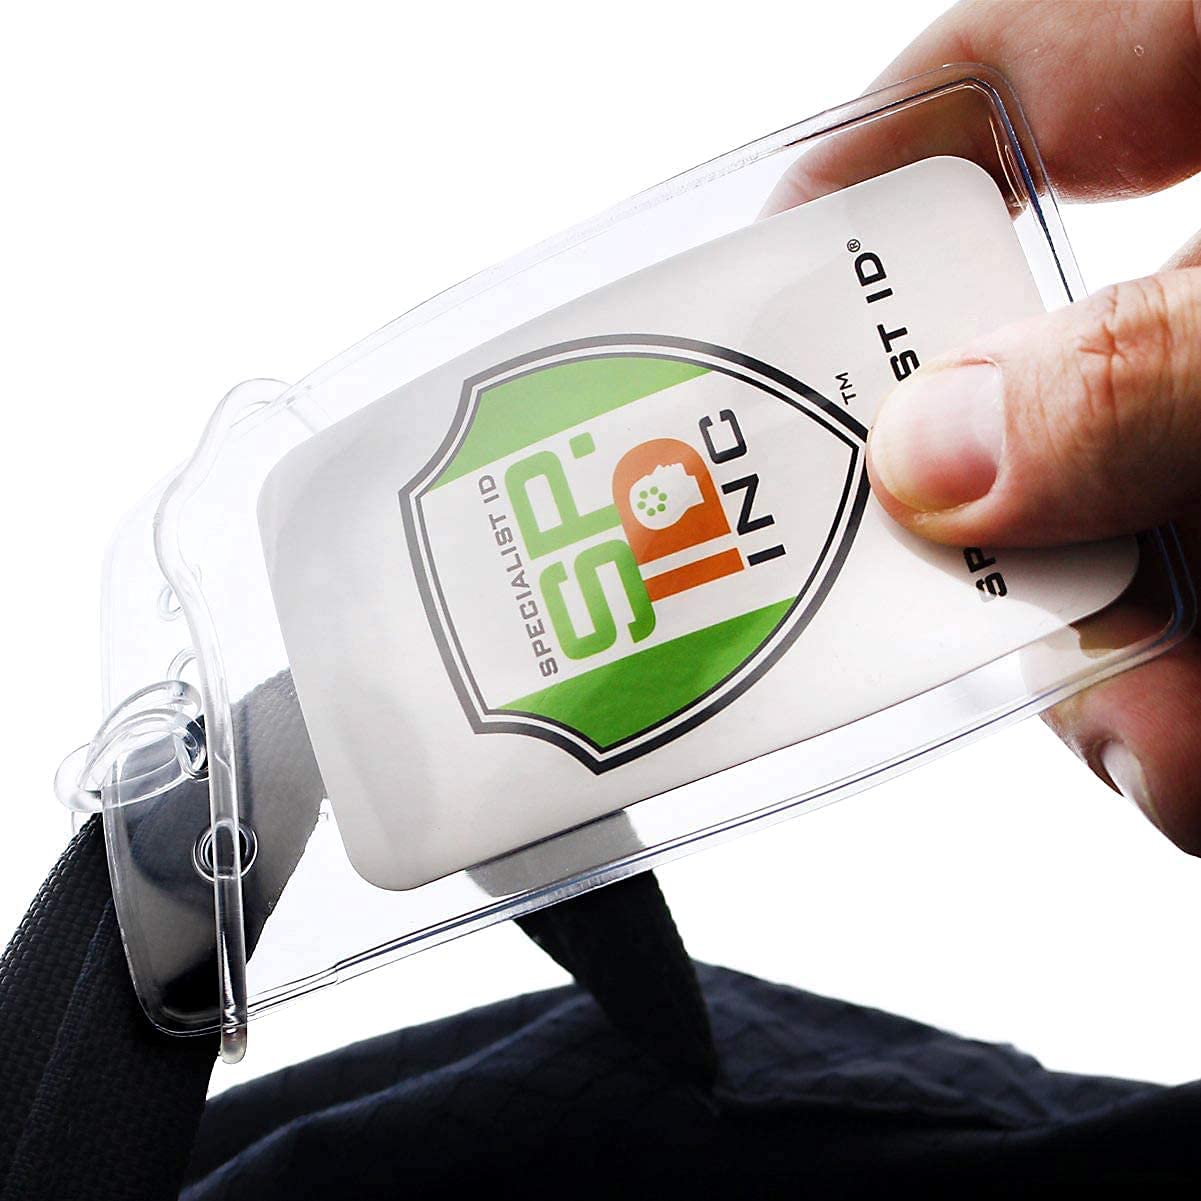 A close-up of a hand inserting a badge with the "Specialist ID" logo into Clear Plastic Luggage Identification Tags with Loops Included - Business Card or Photo Insert (Locking Top), attached to a black strap, ideal for secure loops and luggage tags.